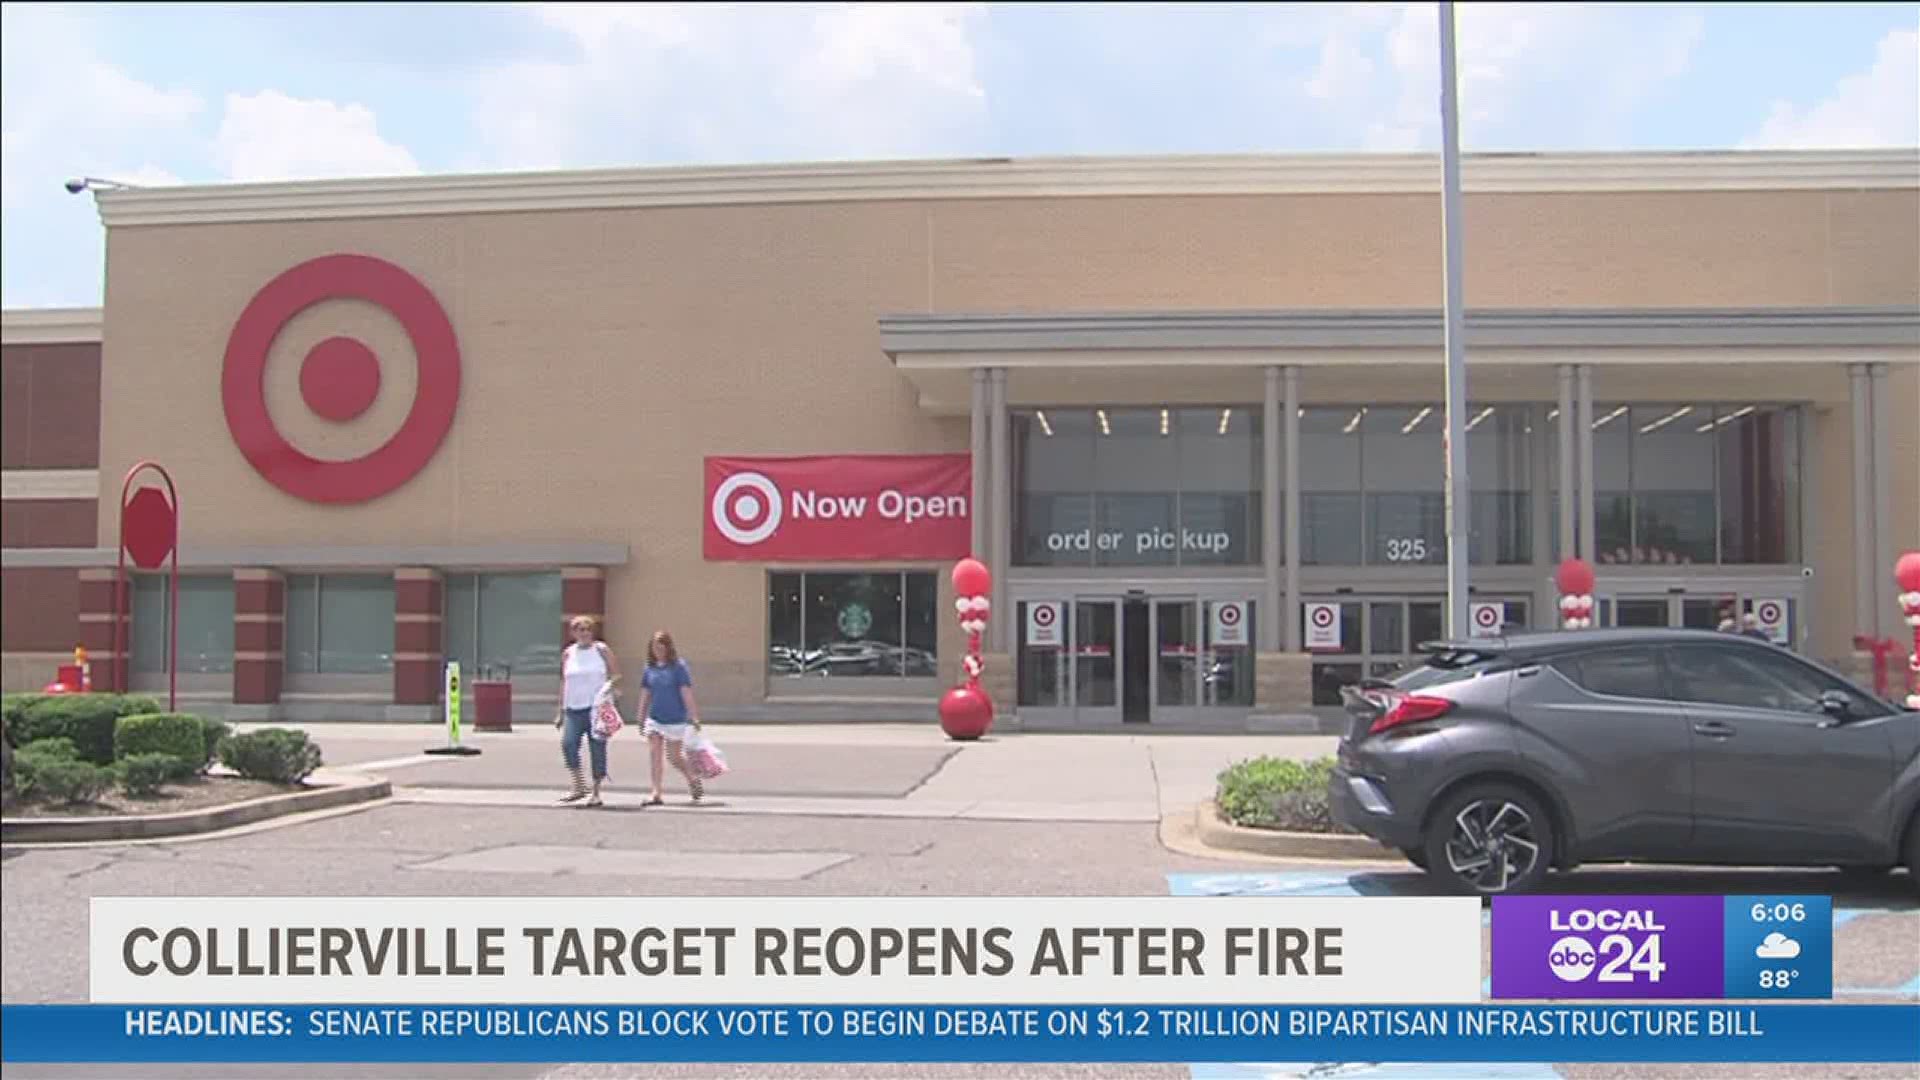 More than a month after a fire damaged the store, the Collierville Target reopened its doors July 21st.